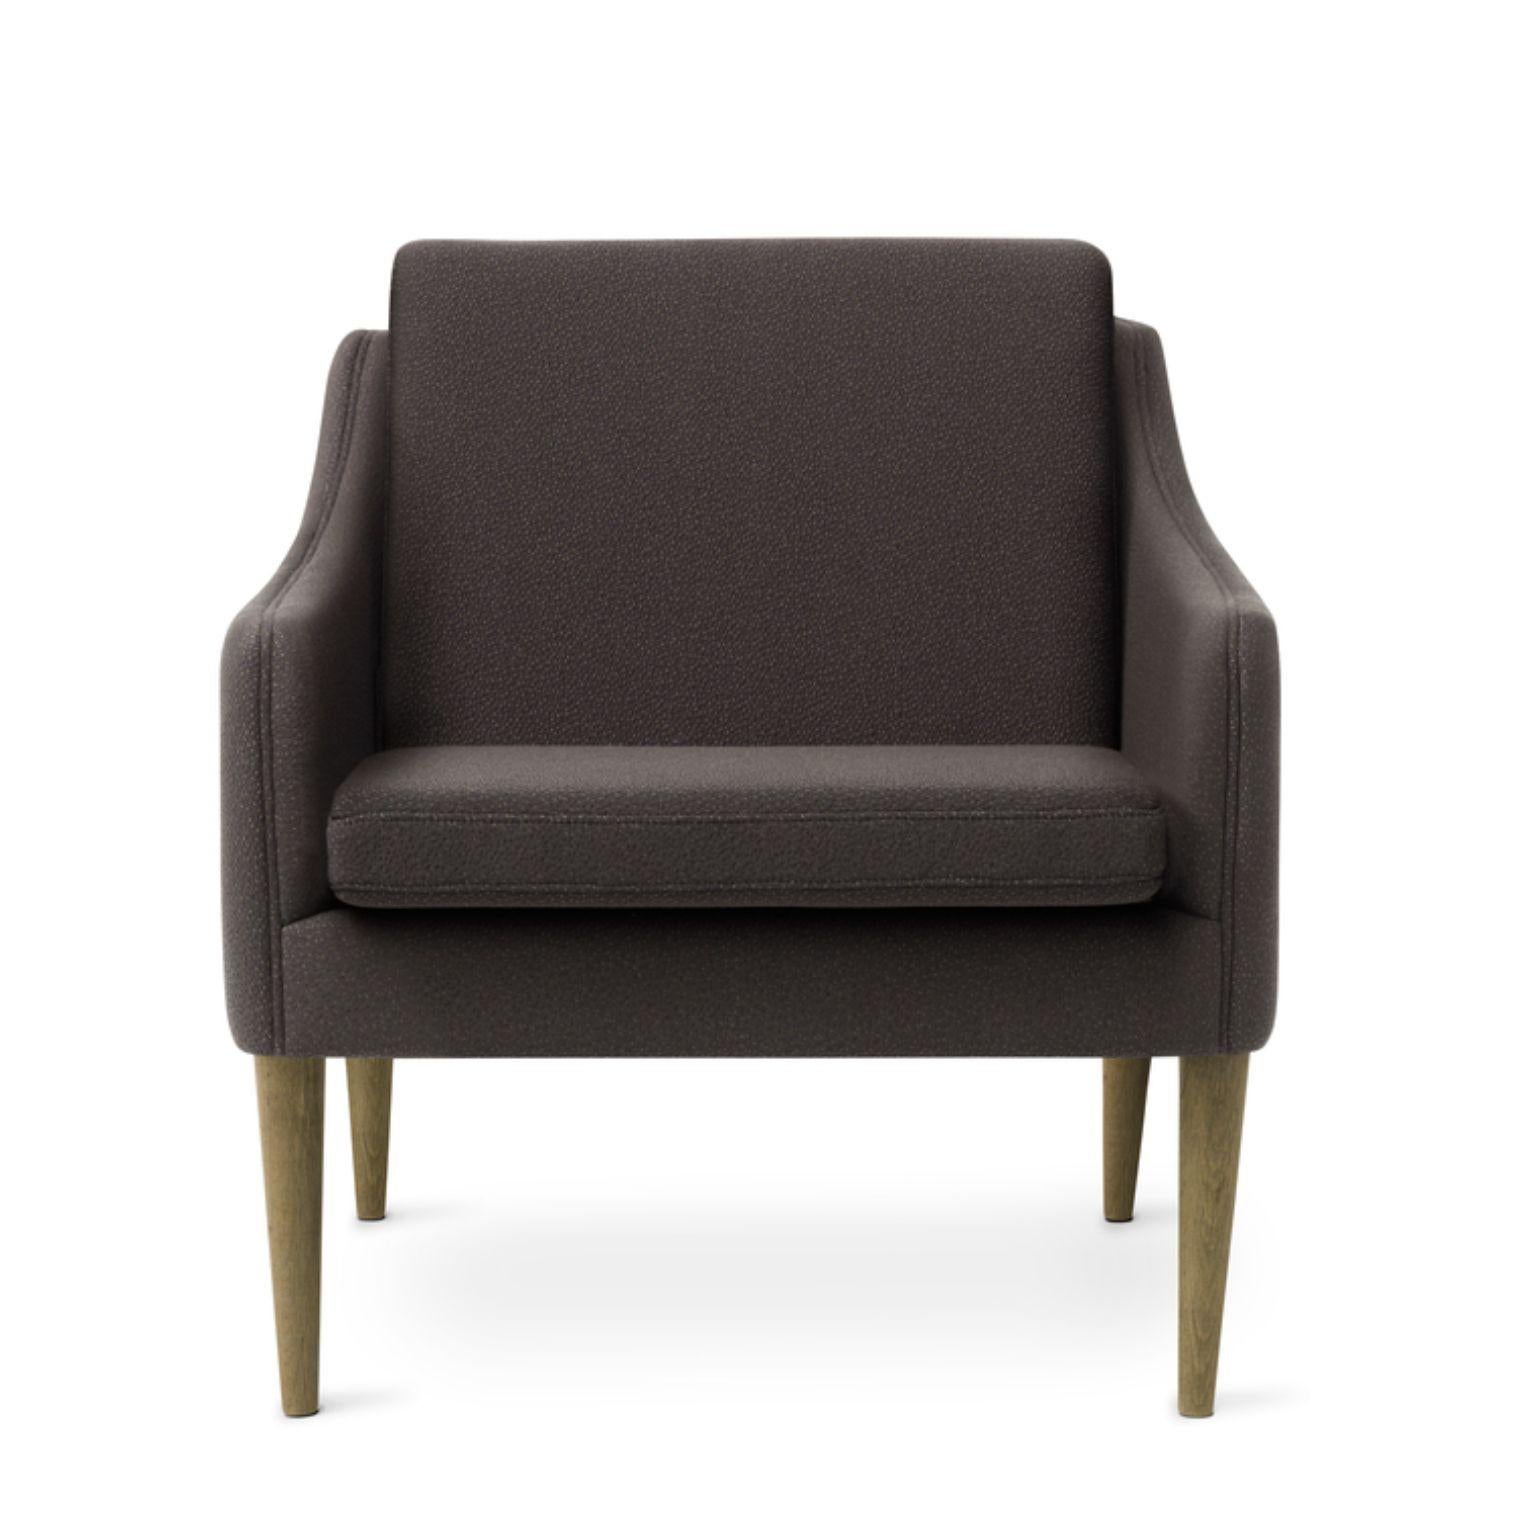 Mr. Olsen Lounge Chair Sprinkles Solid Smoked Oak Mocca by Warm Nordic
Dimensions: D81 x W79 x H 78 cm
Material: Textile upholstery, Foam, Spring system, Oak
Weight: 27 kg
Also available in different colours, materials and finishes. Please